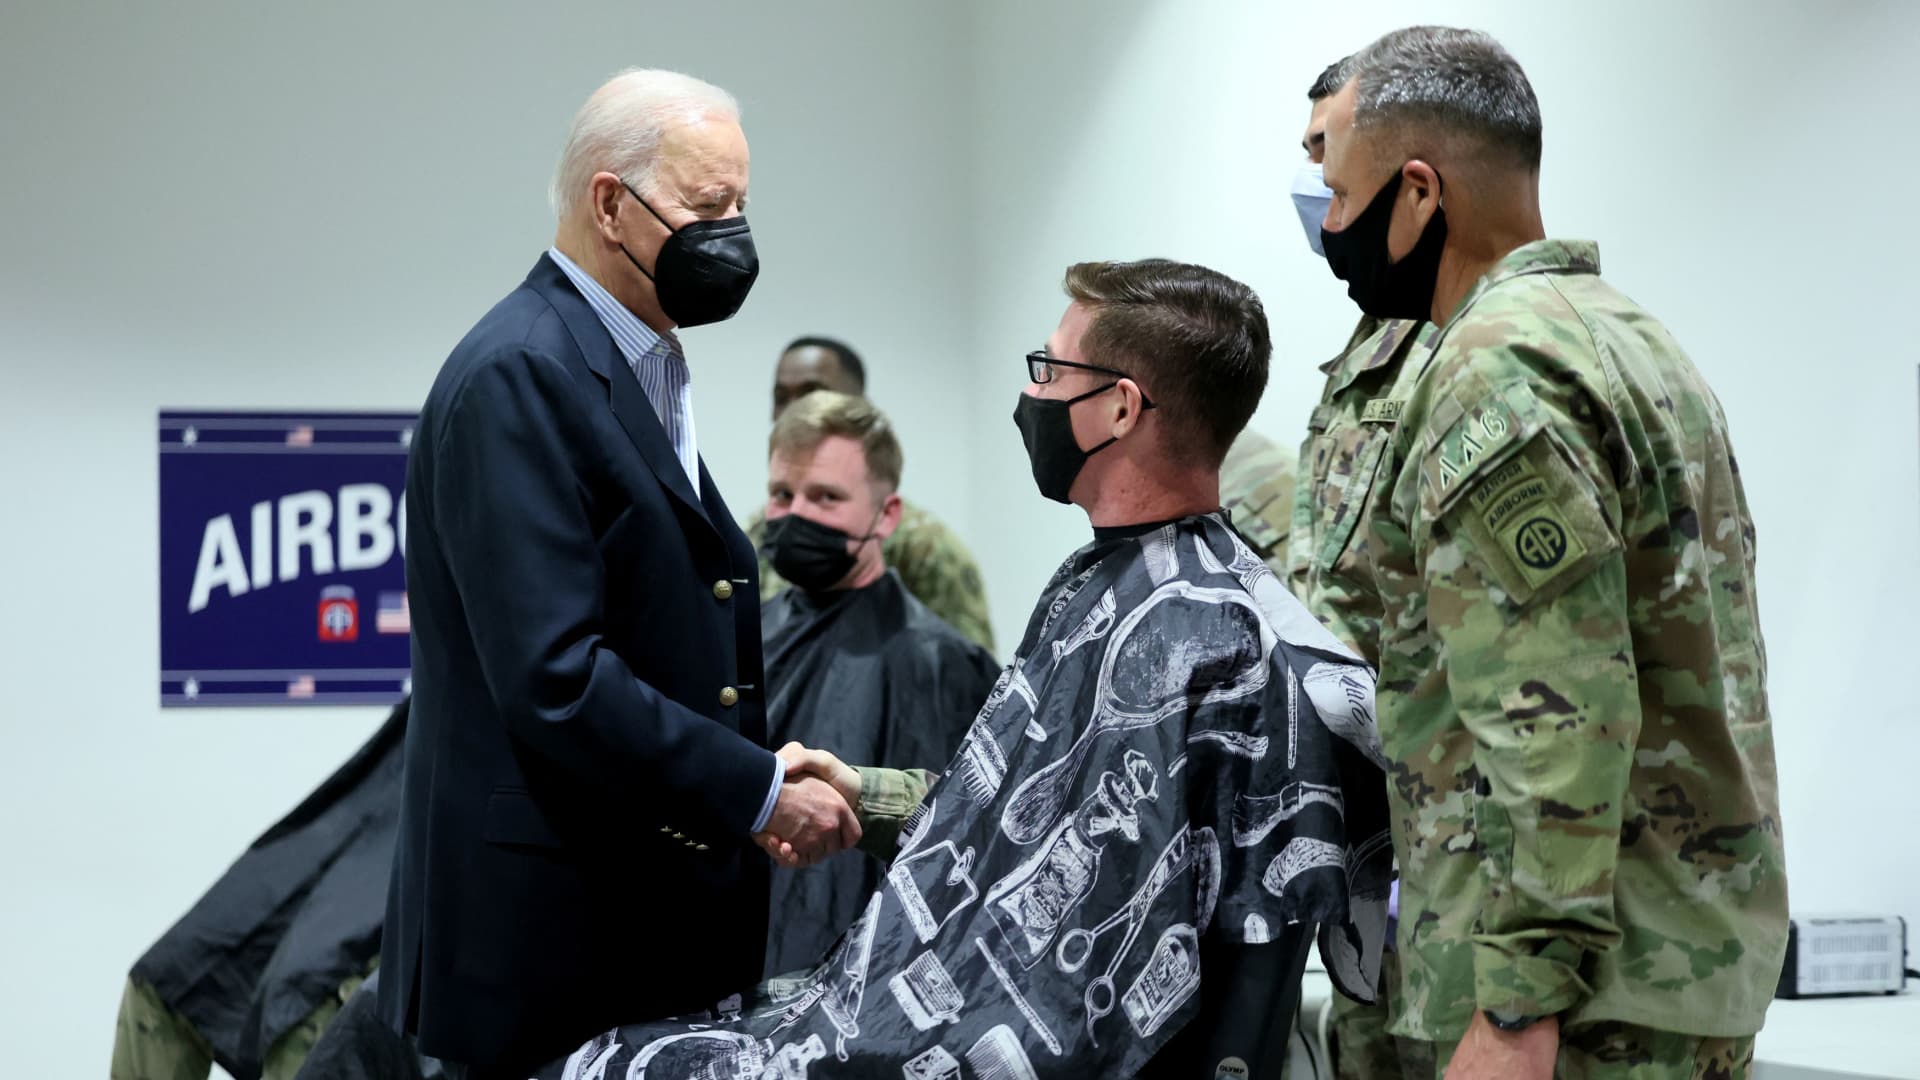 U.S. President Joe Biden meets with U.S. Army soldiers assigned to the 82nd Airborne Division at the G2 Arena in Jasionka, near Rzeszow, Poland, March 25, 2022.